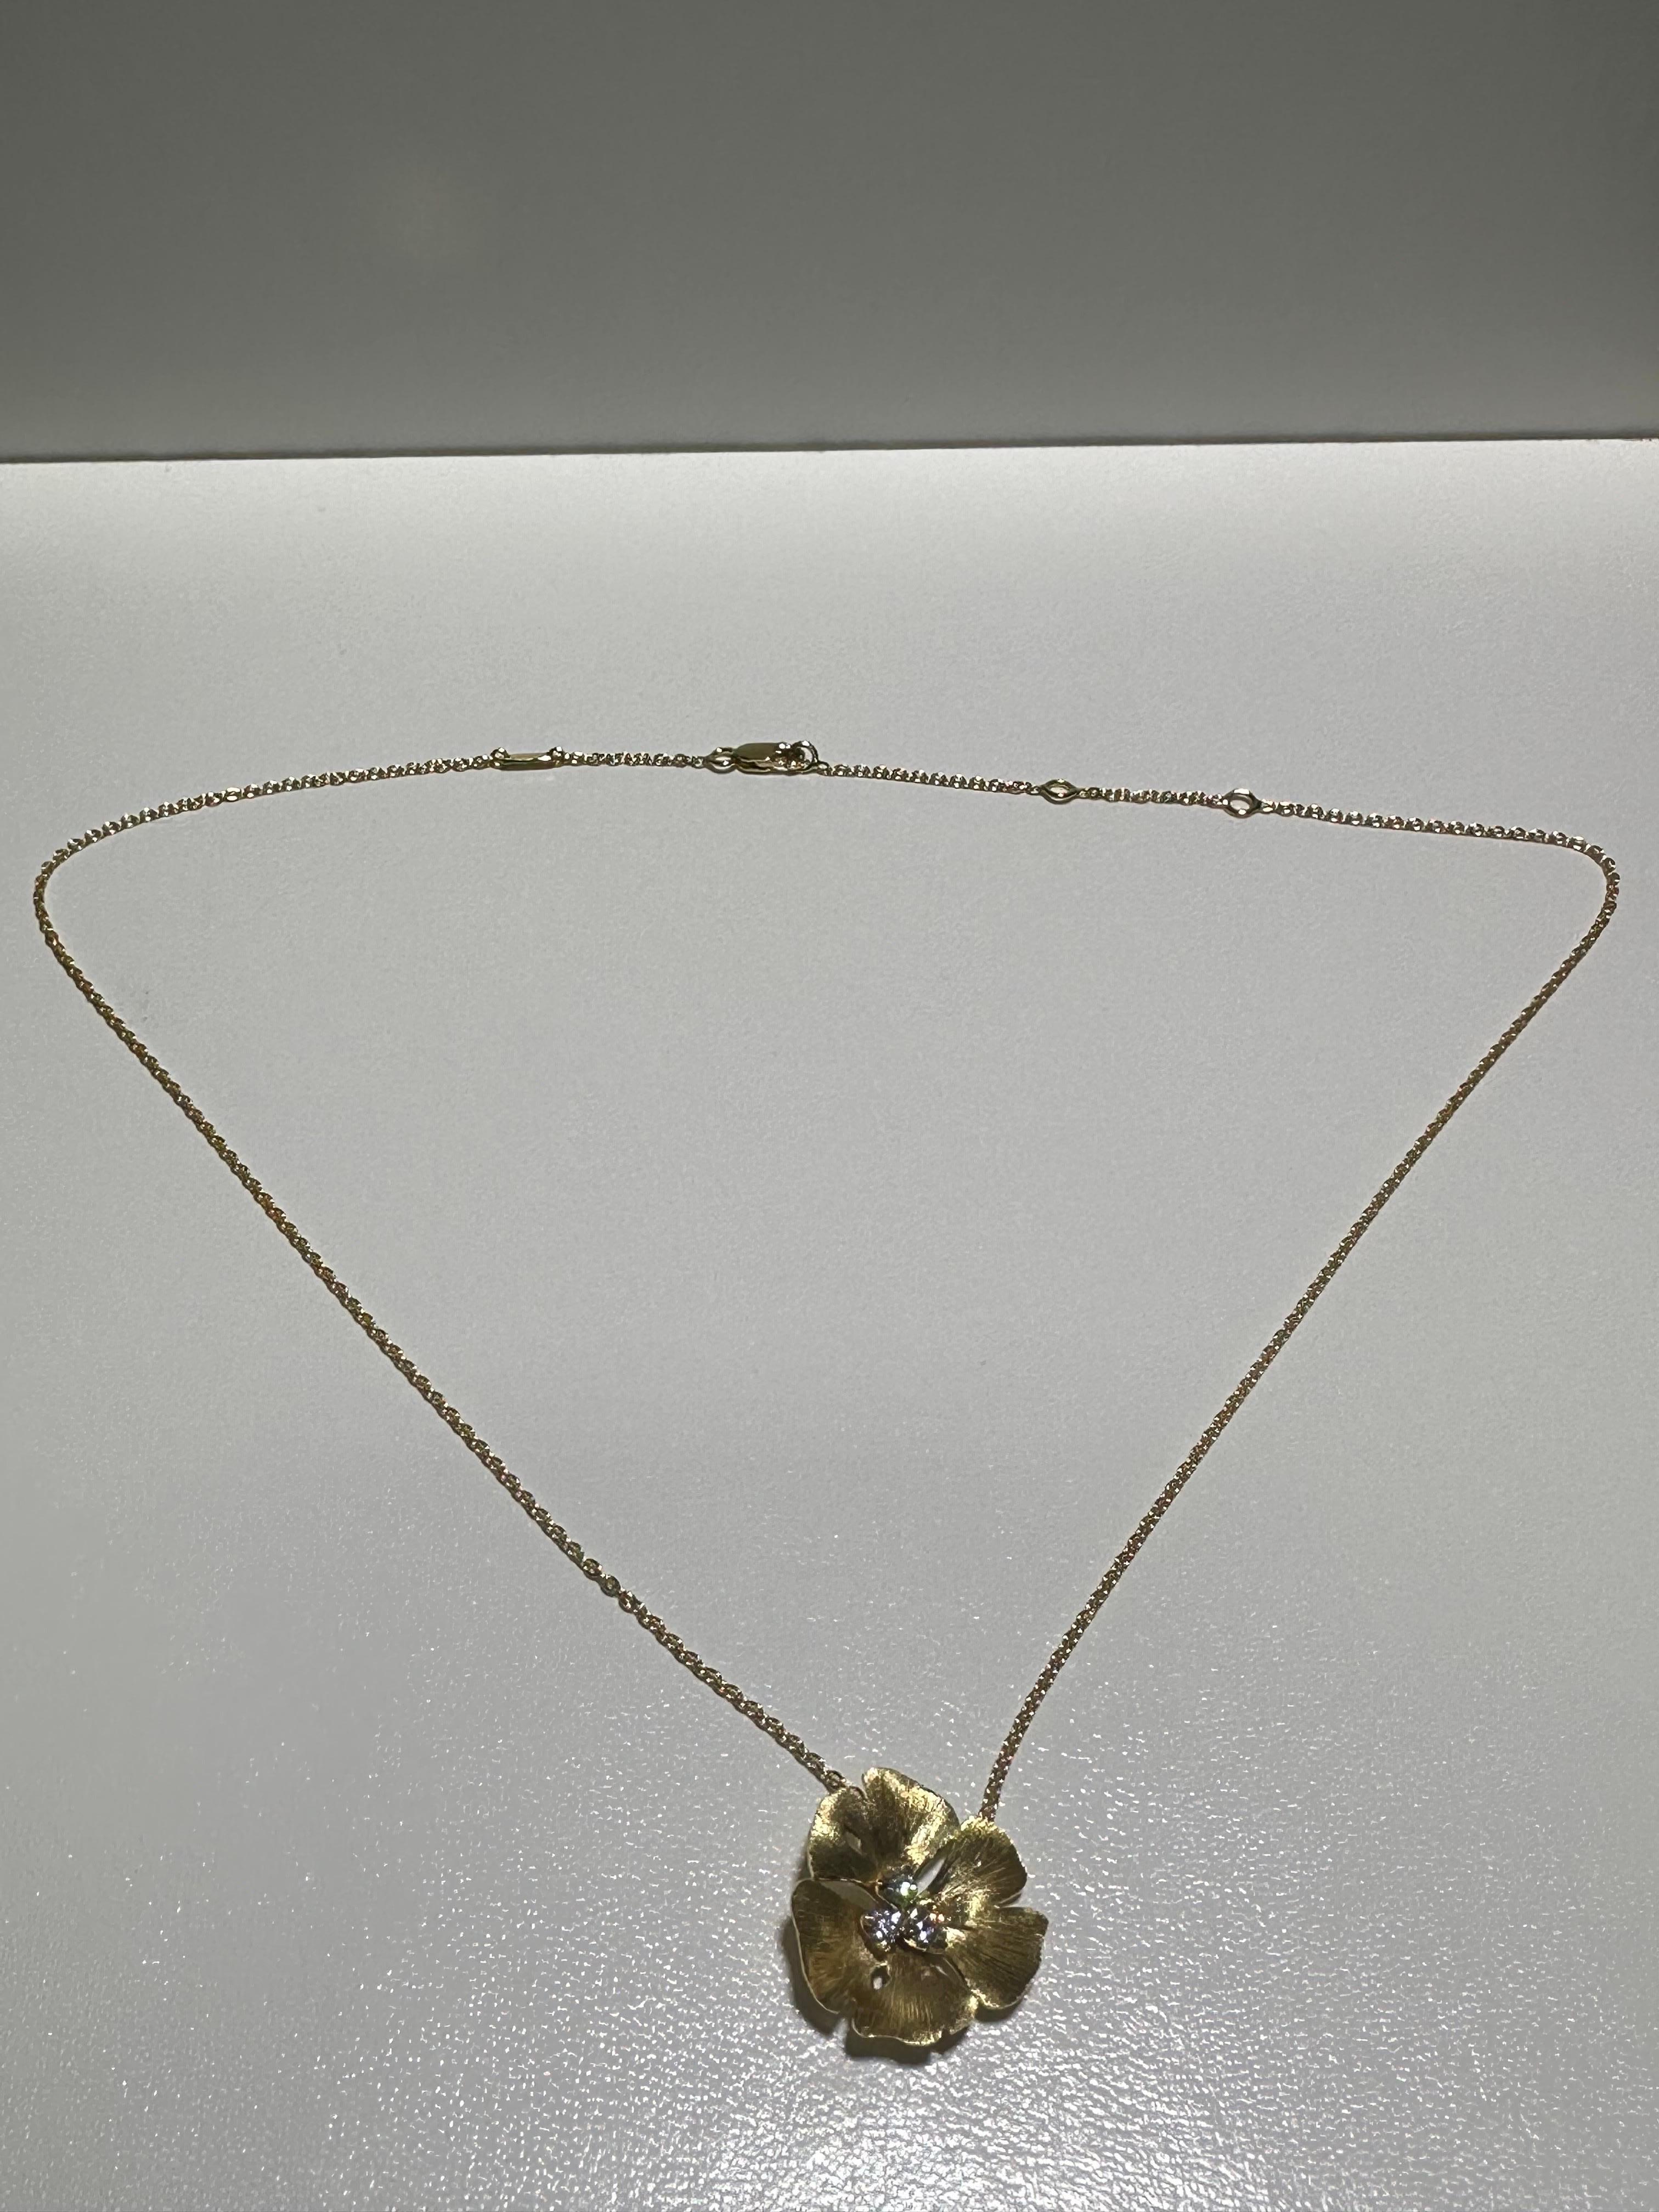 Maison Vever Ginkgo Necklace Medium model In New Condition For Sale In Heerlen, NL